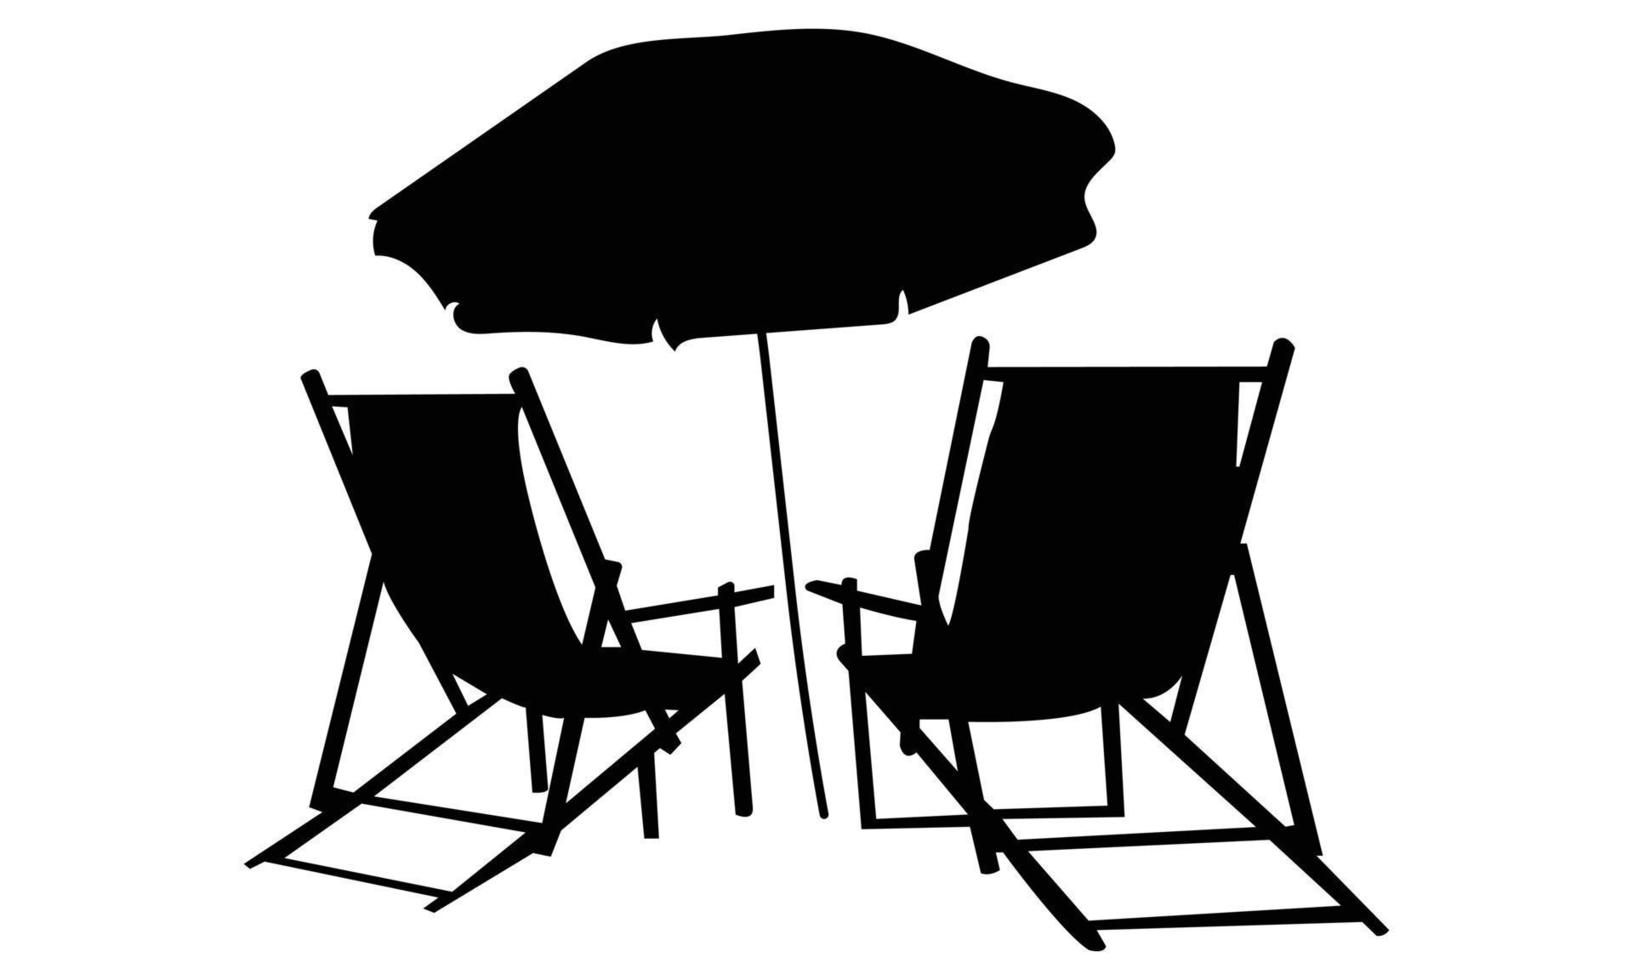 beach chair silhouettes on white background vector